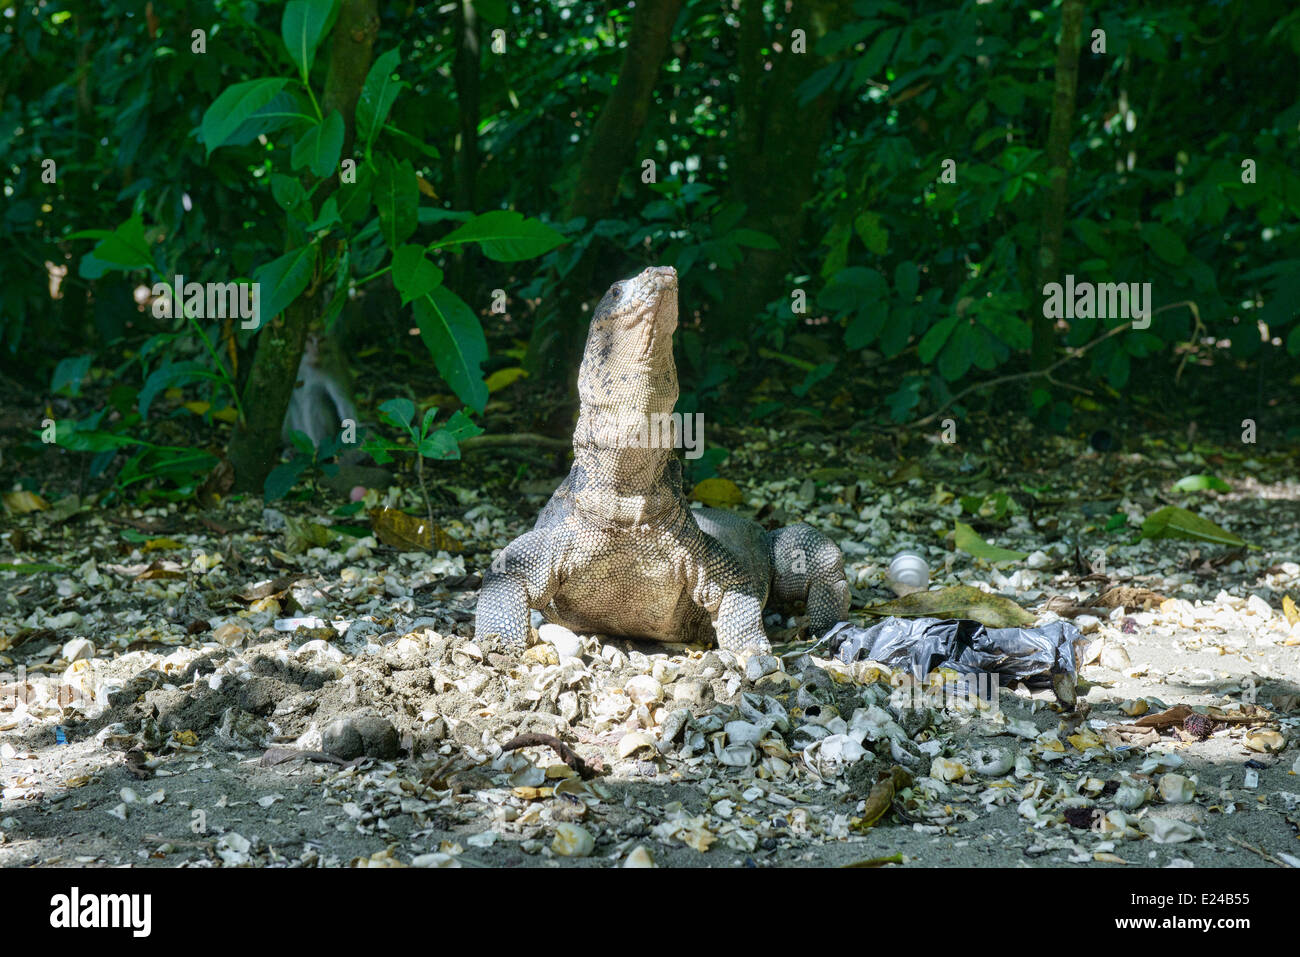 monitor lizard with a turtle egg in his mouth, Meru Betiri National Park, Sukamade Beach, Java, Indonesia Stock Photo